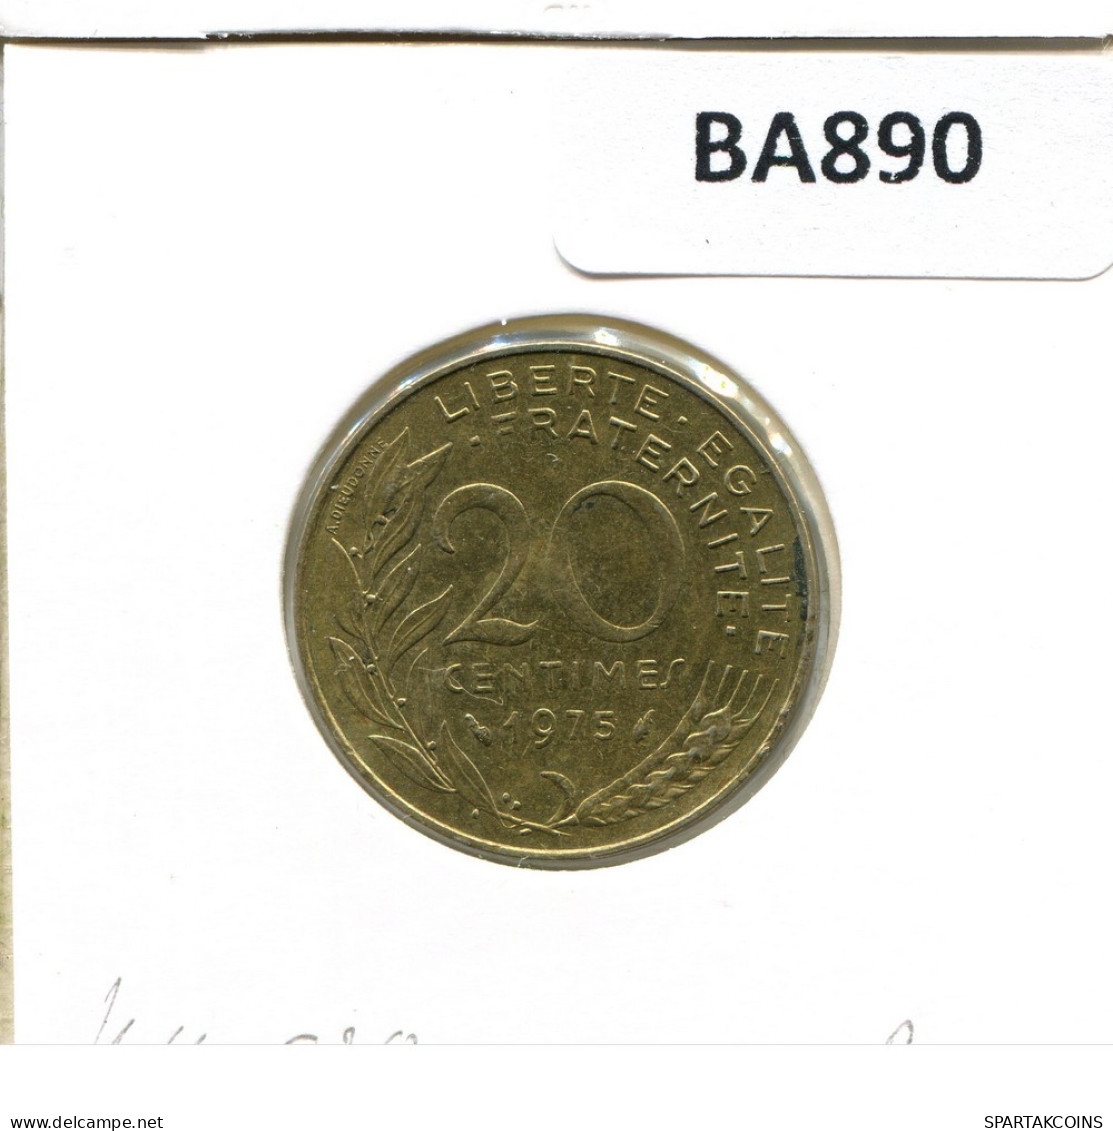 20 CENTIMES 1975 FRANCE Coin French Coin #BA890.U.A - 20 Centimes